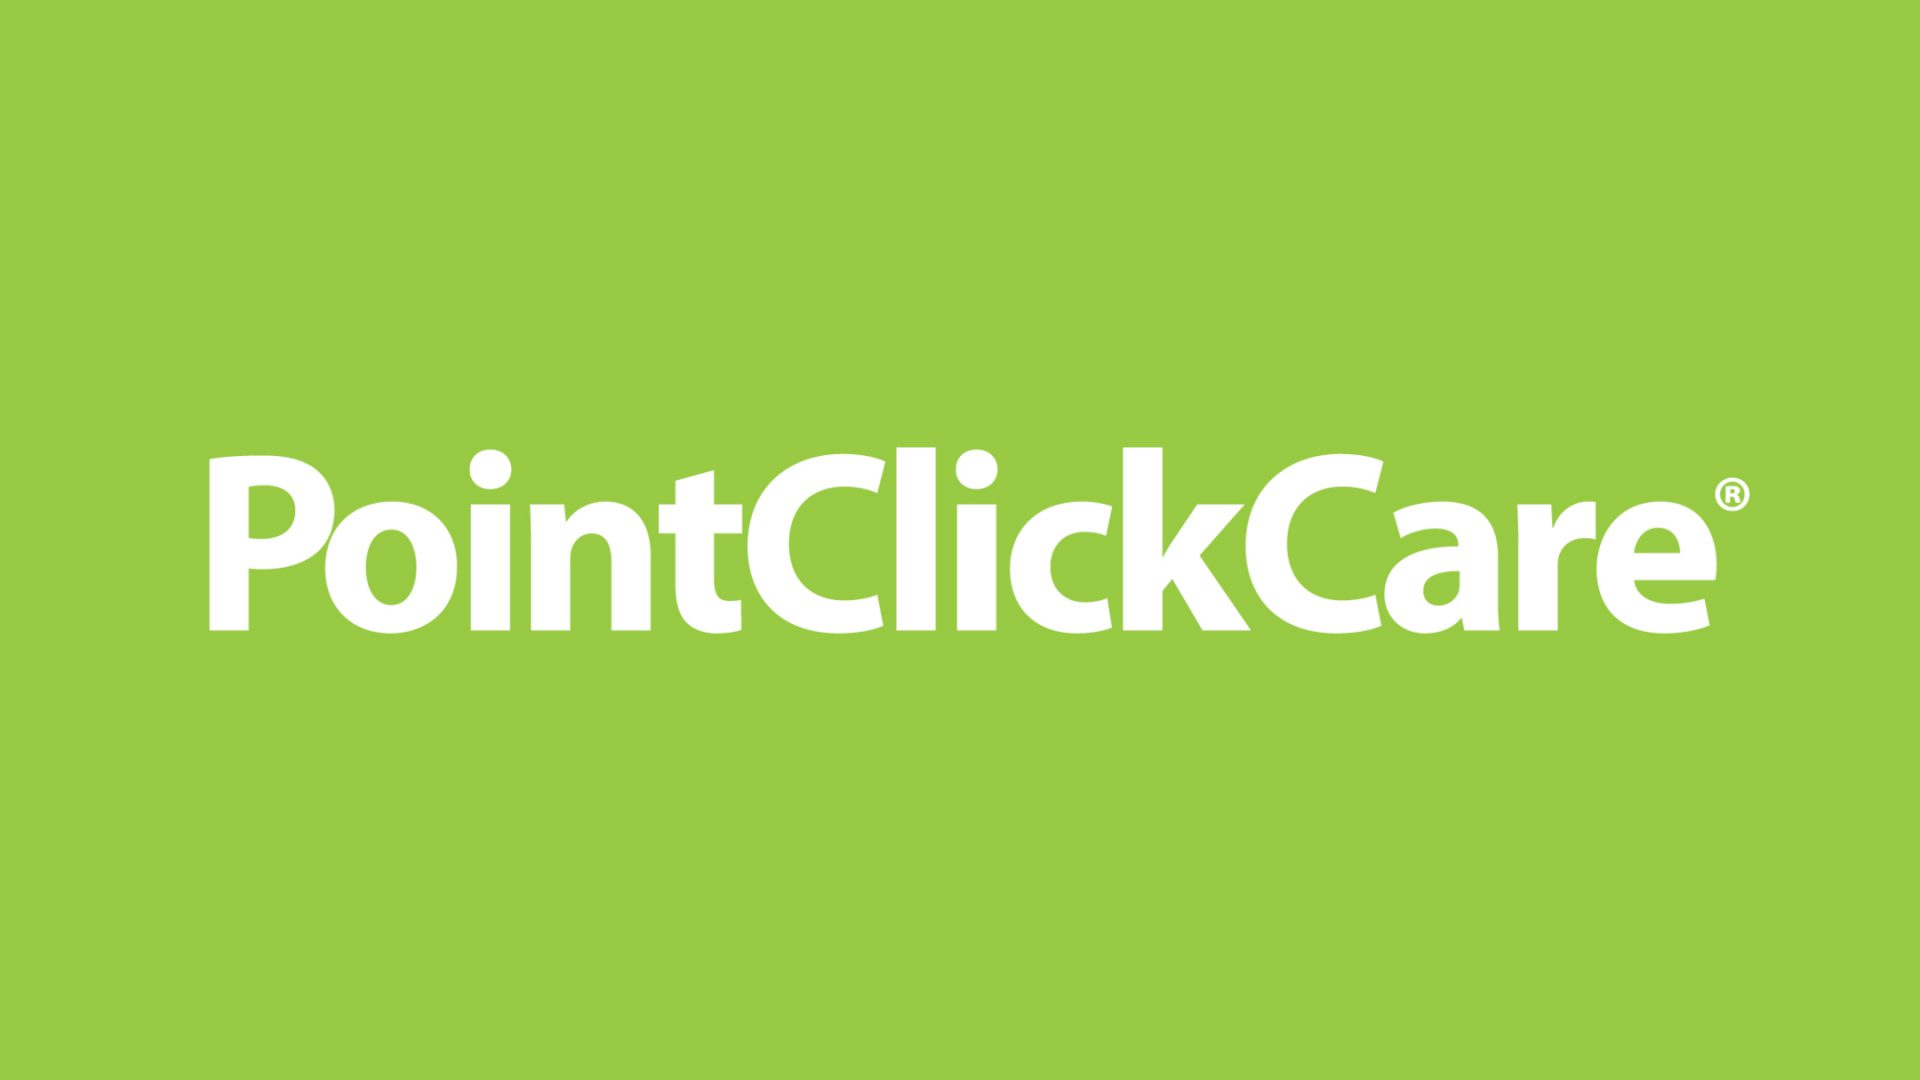 Nxtgen Care has developed exciting new PointClickCare integration.